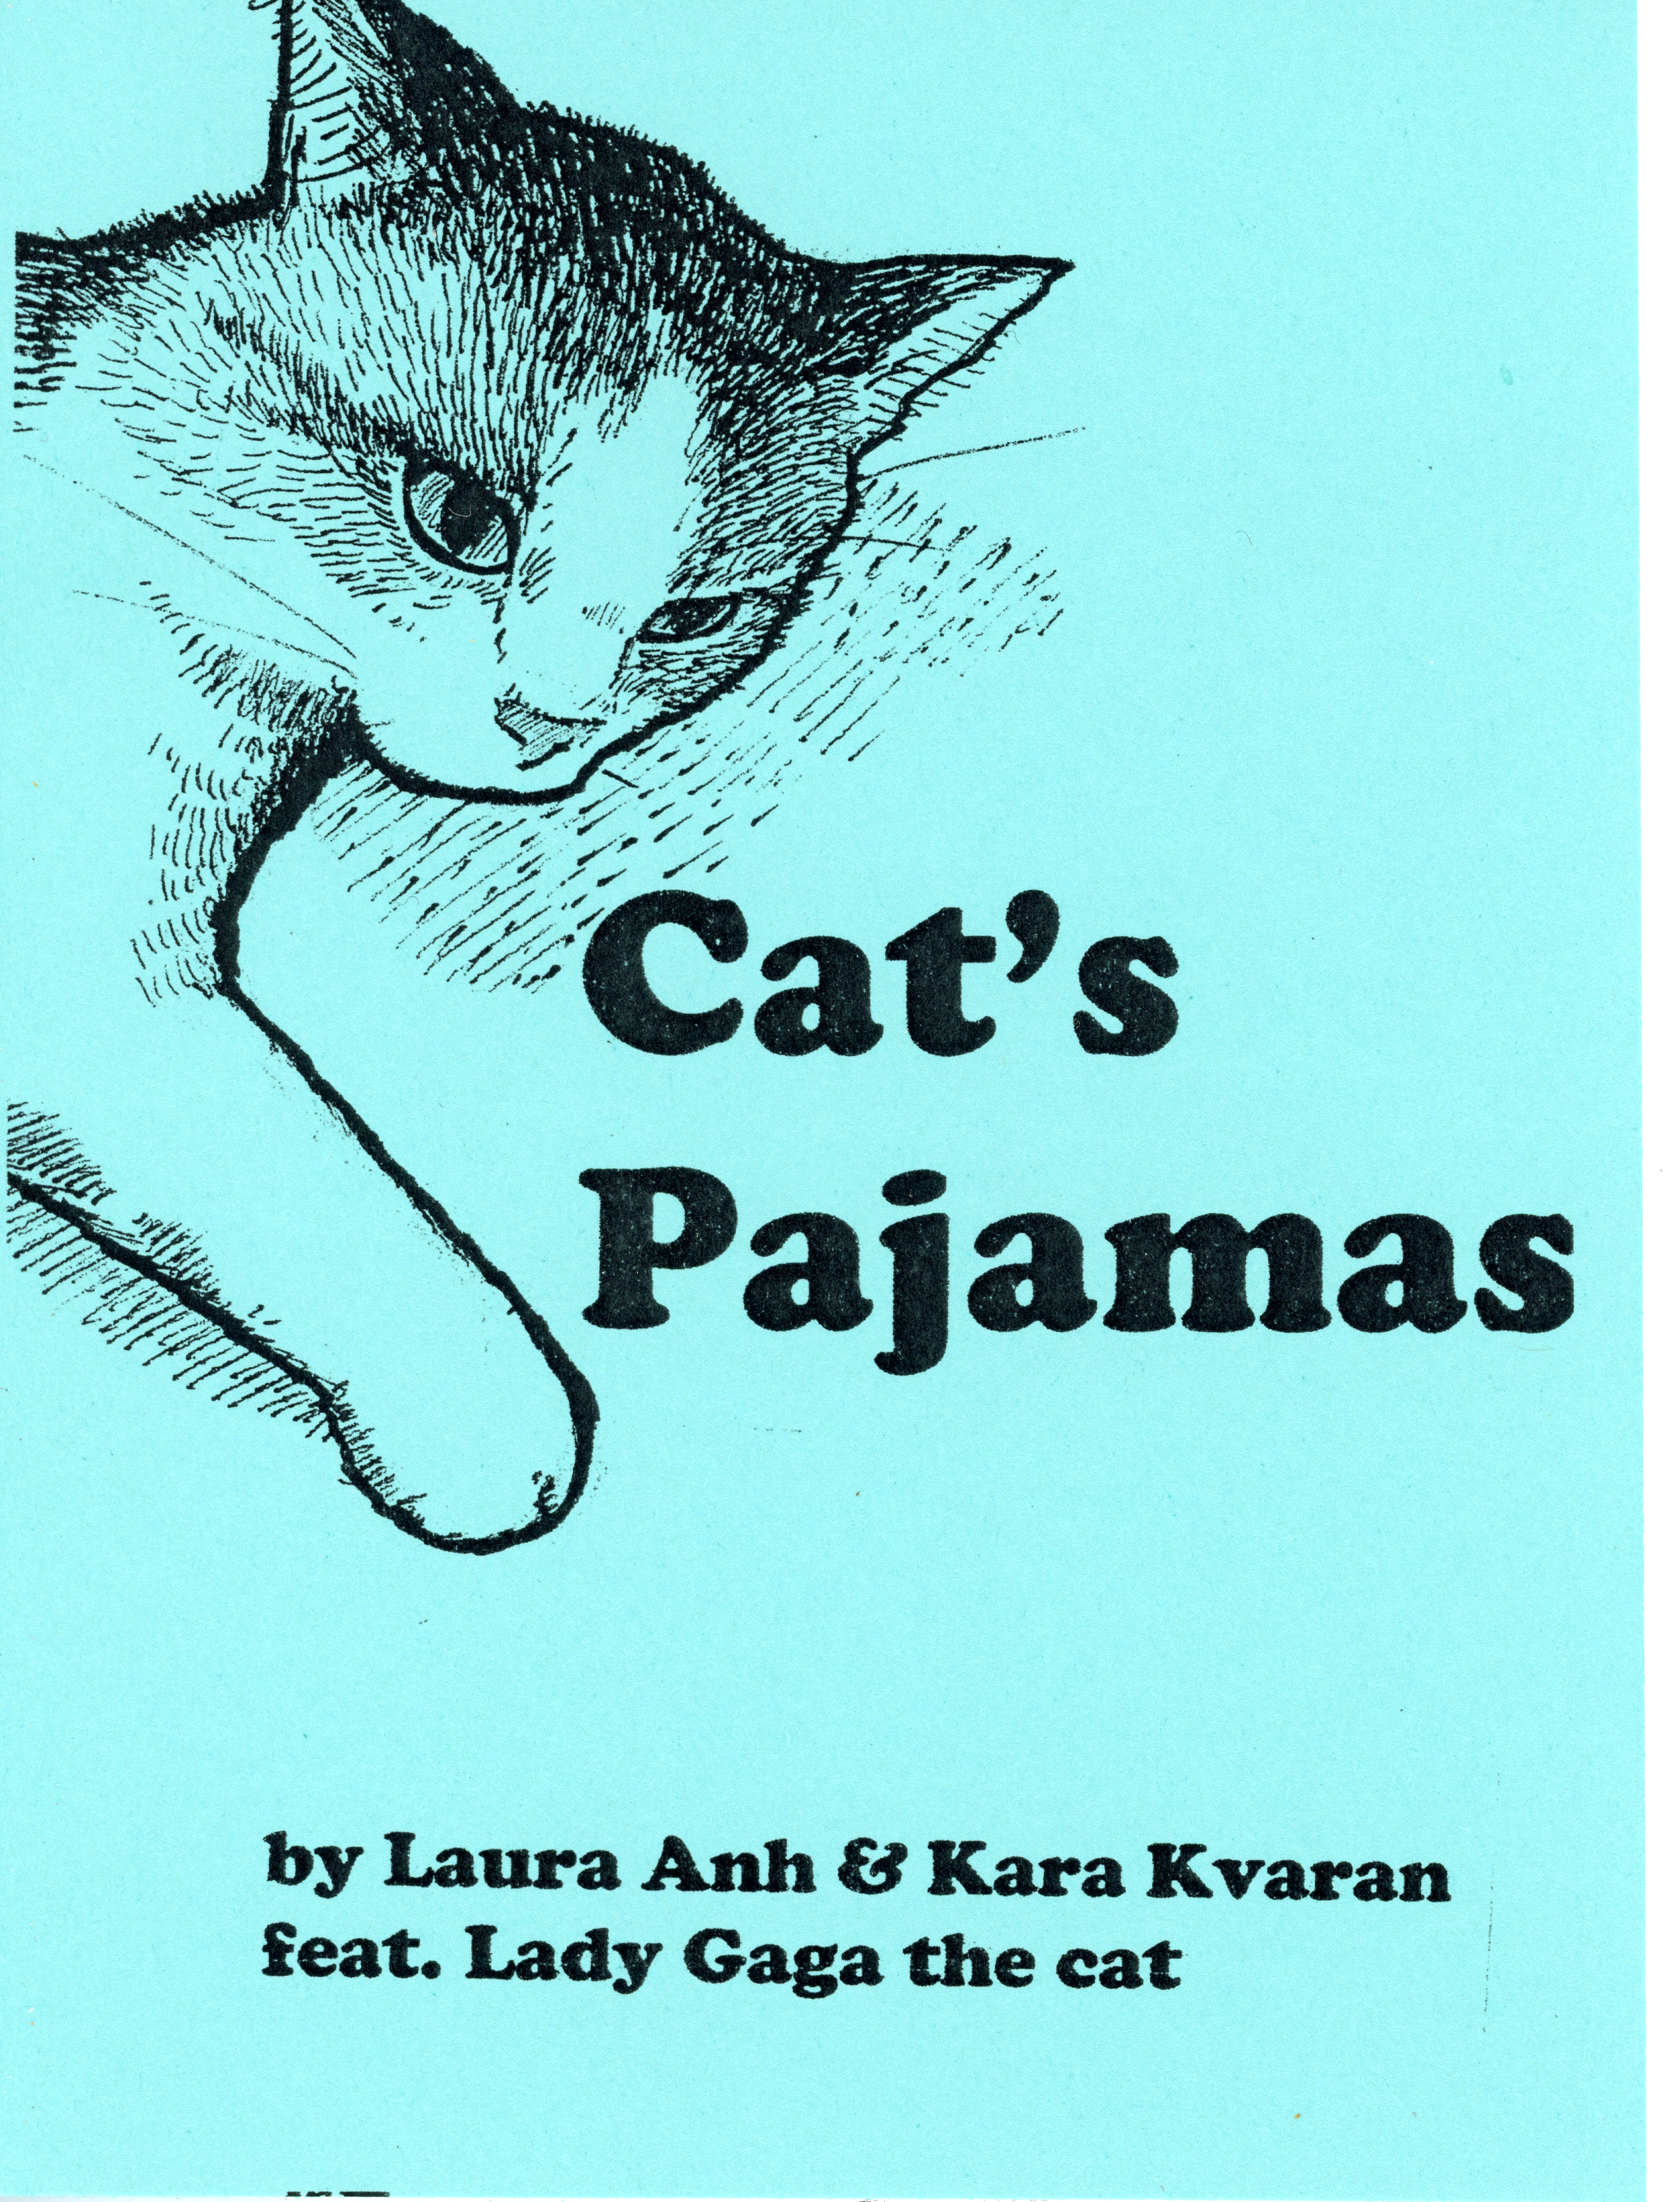 Cat's PJS by Laura Anh Williams and Kara Kvaran featuring Lady Gaga the Cat who is sketched on the cover 